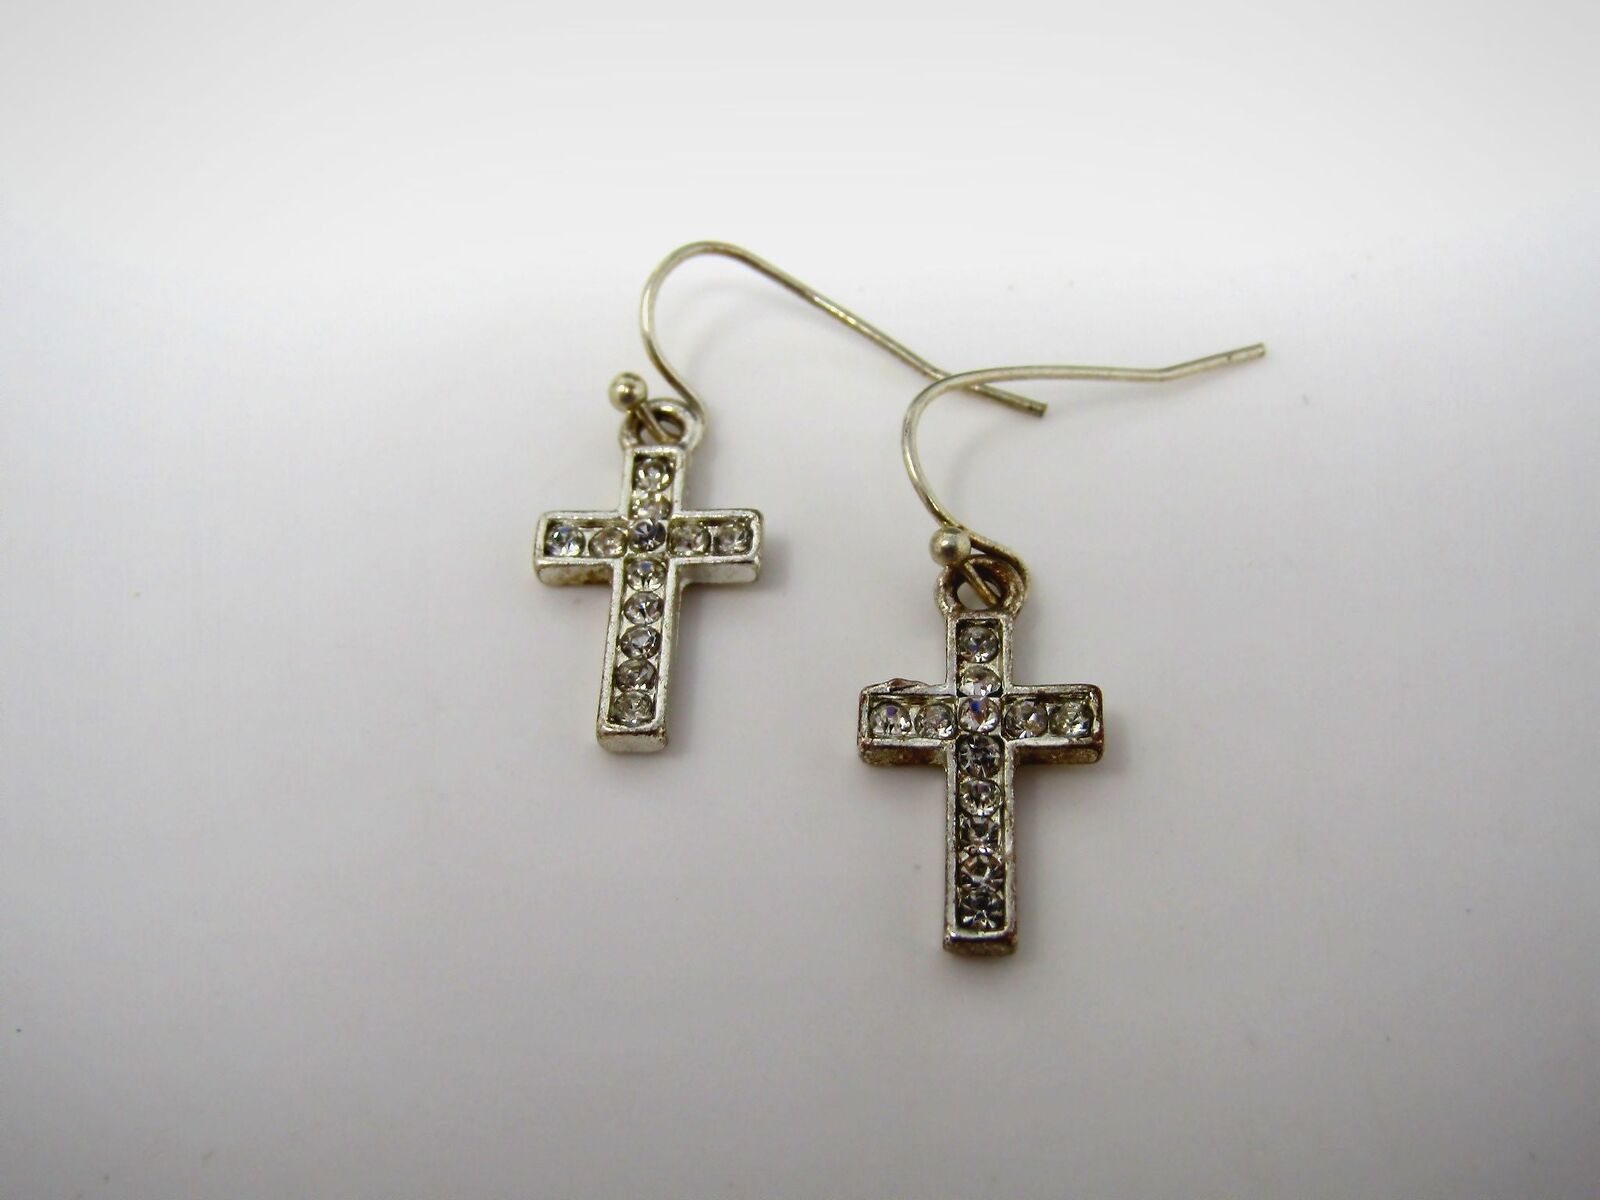 Vintage Christian Earrings Religious Jewelry: Clear Jewels Small Cross Crosses